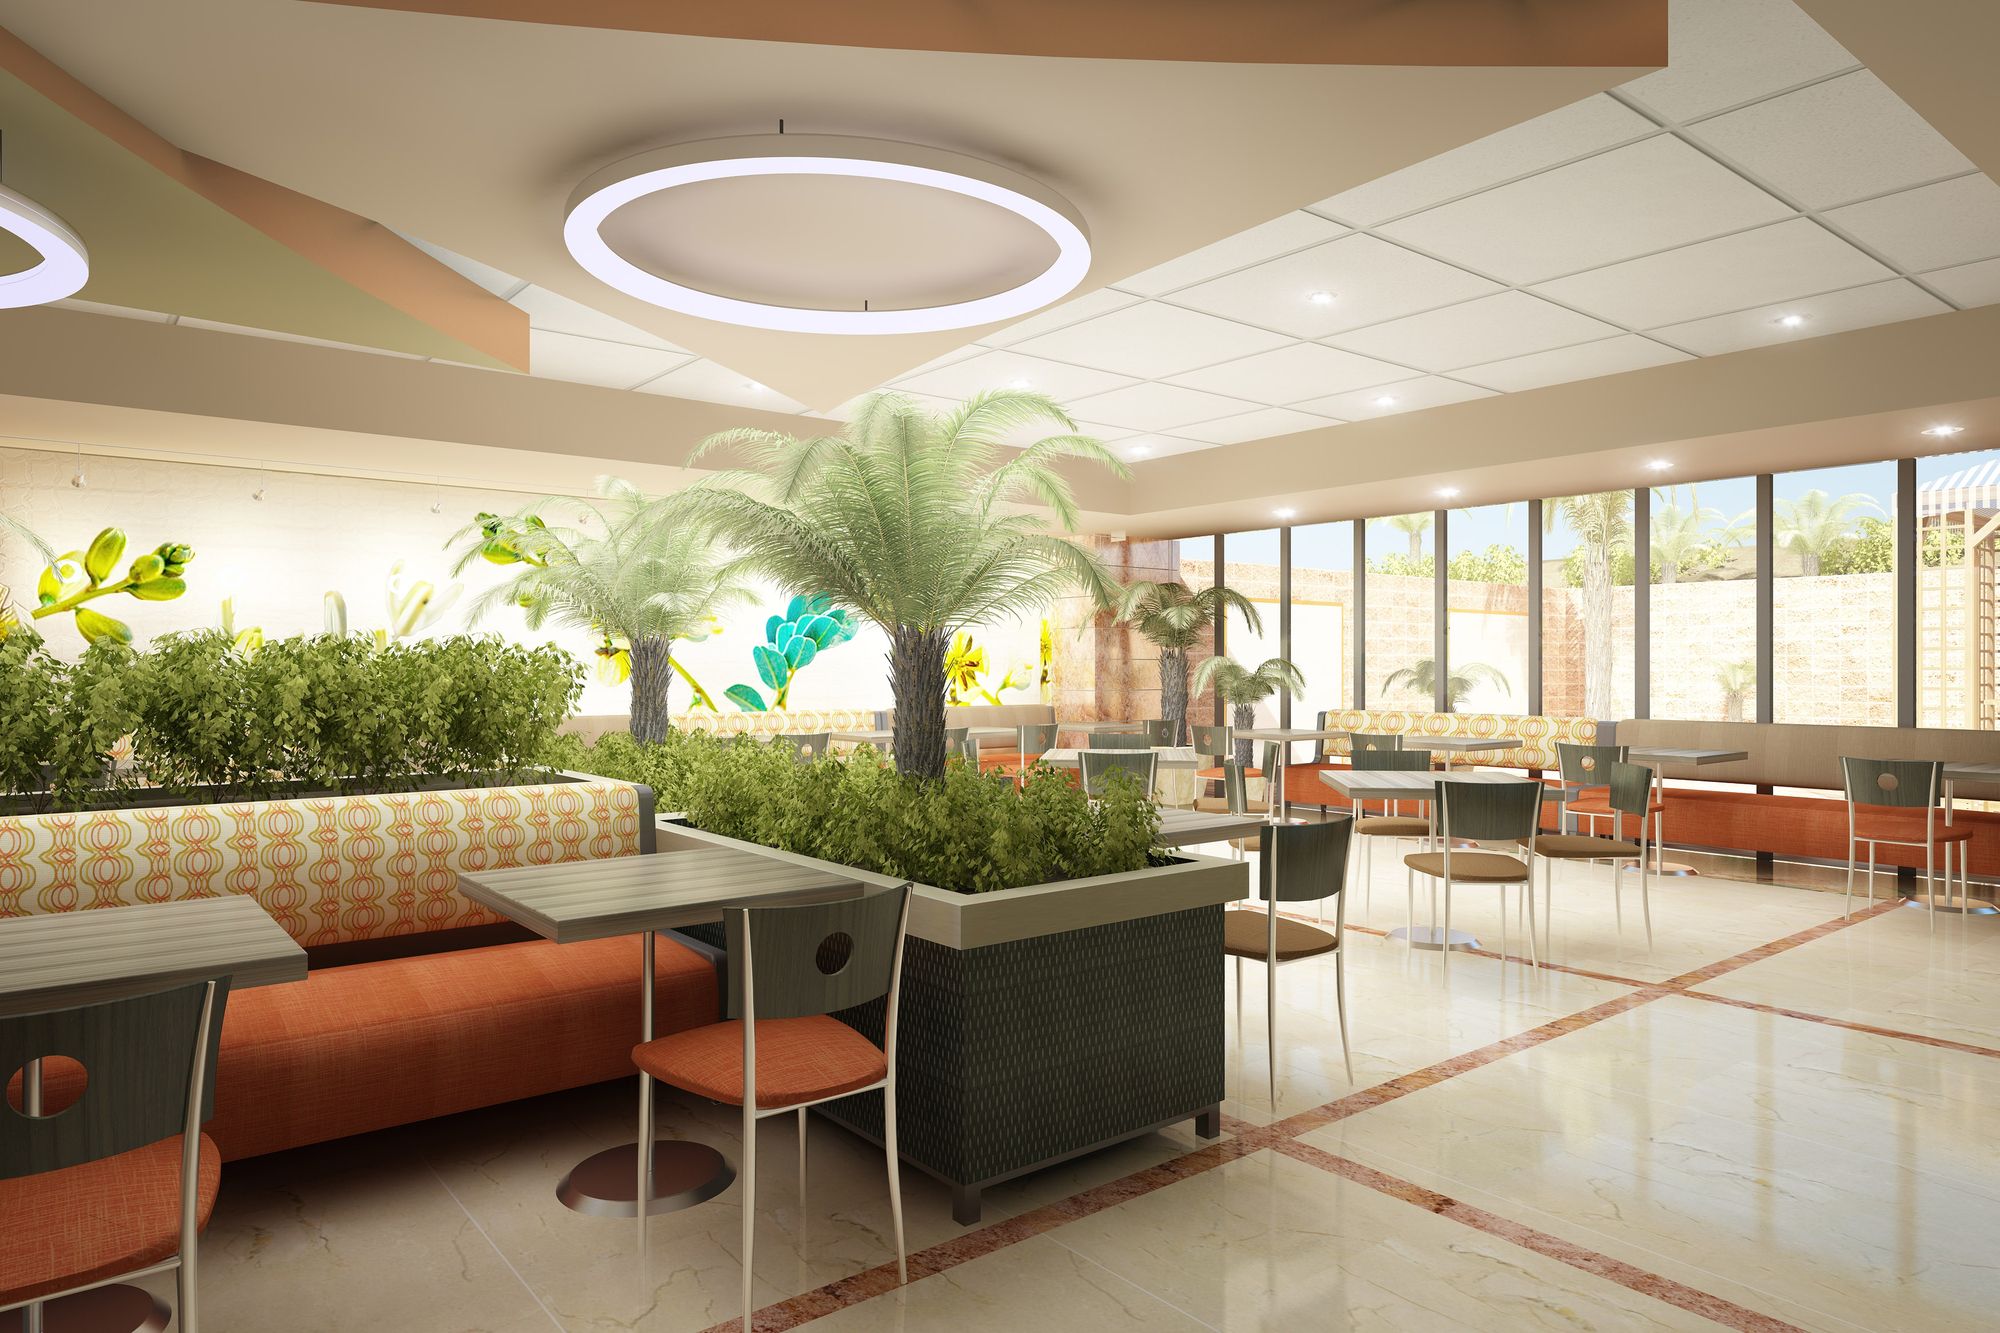 Dining area rendering